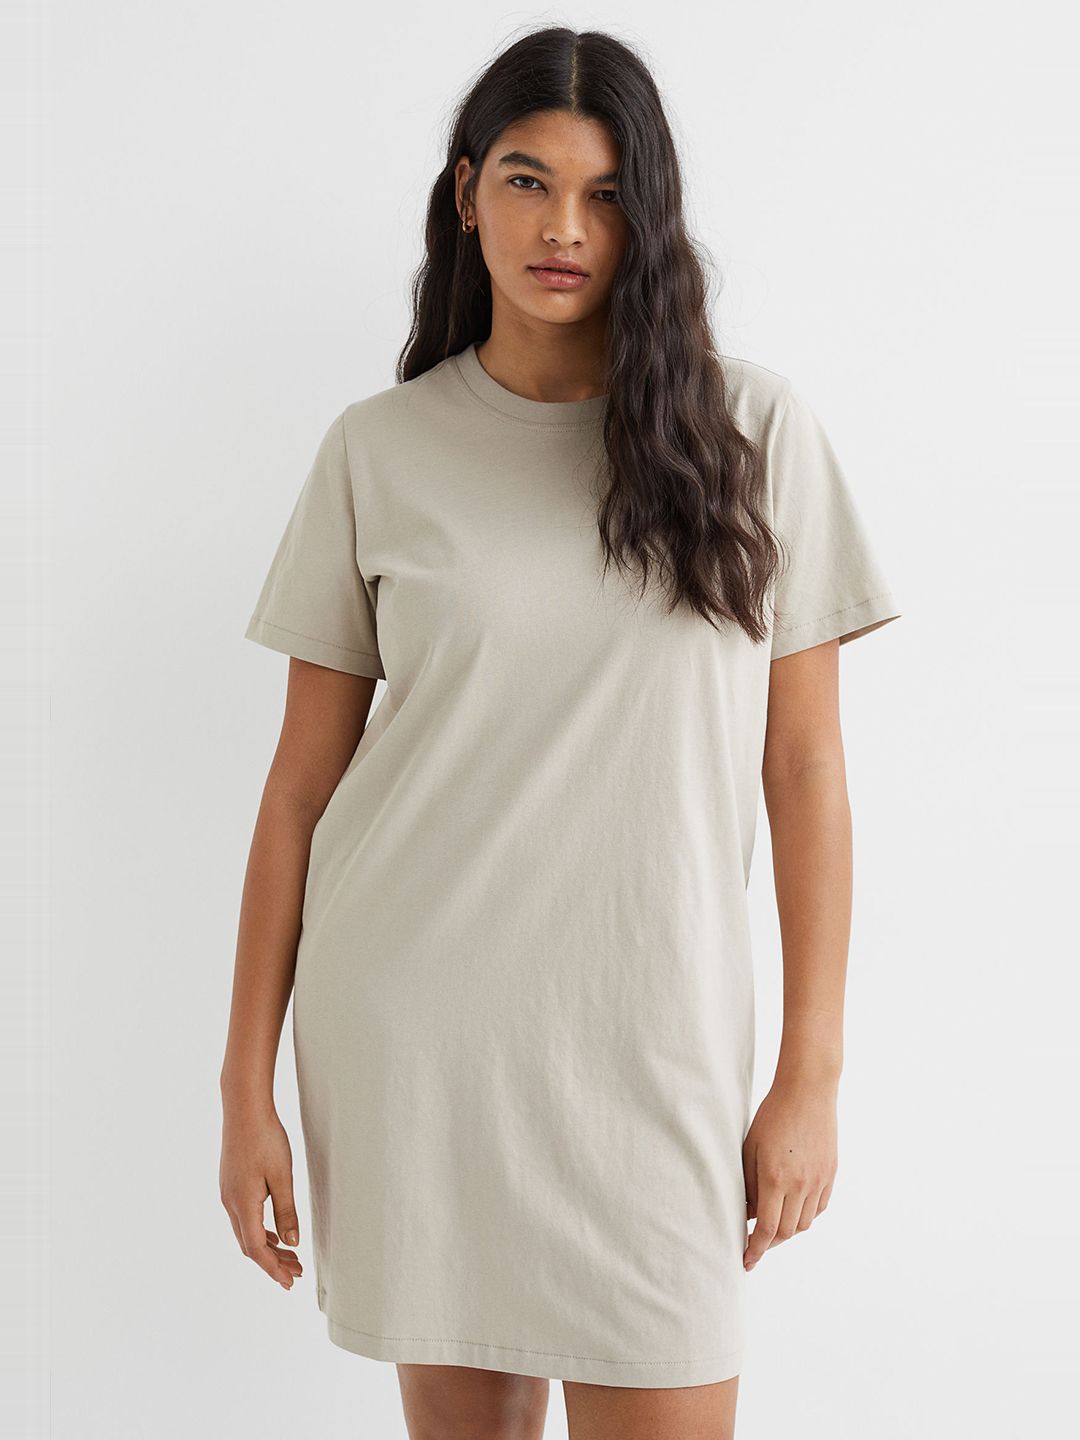 H&M Beige Solid Pure Cotton T-shirt Dress Price in India